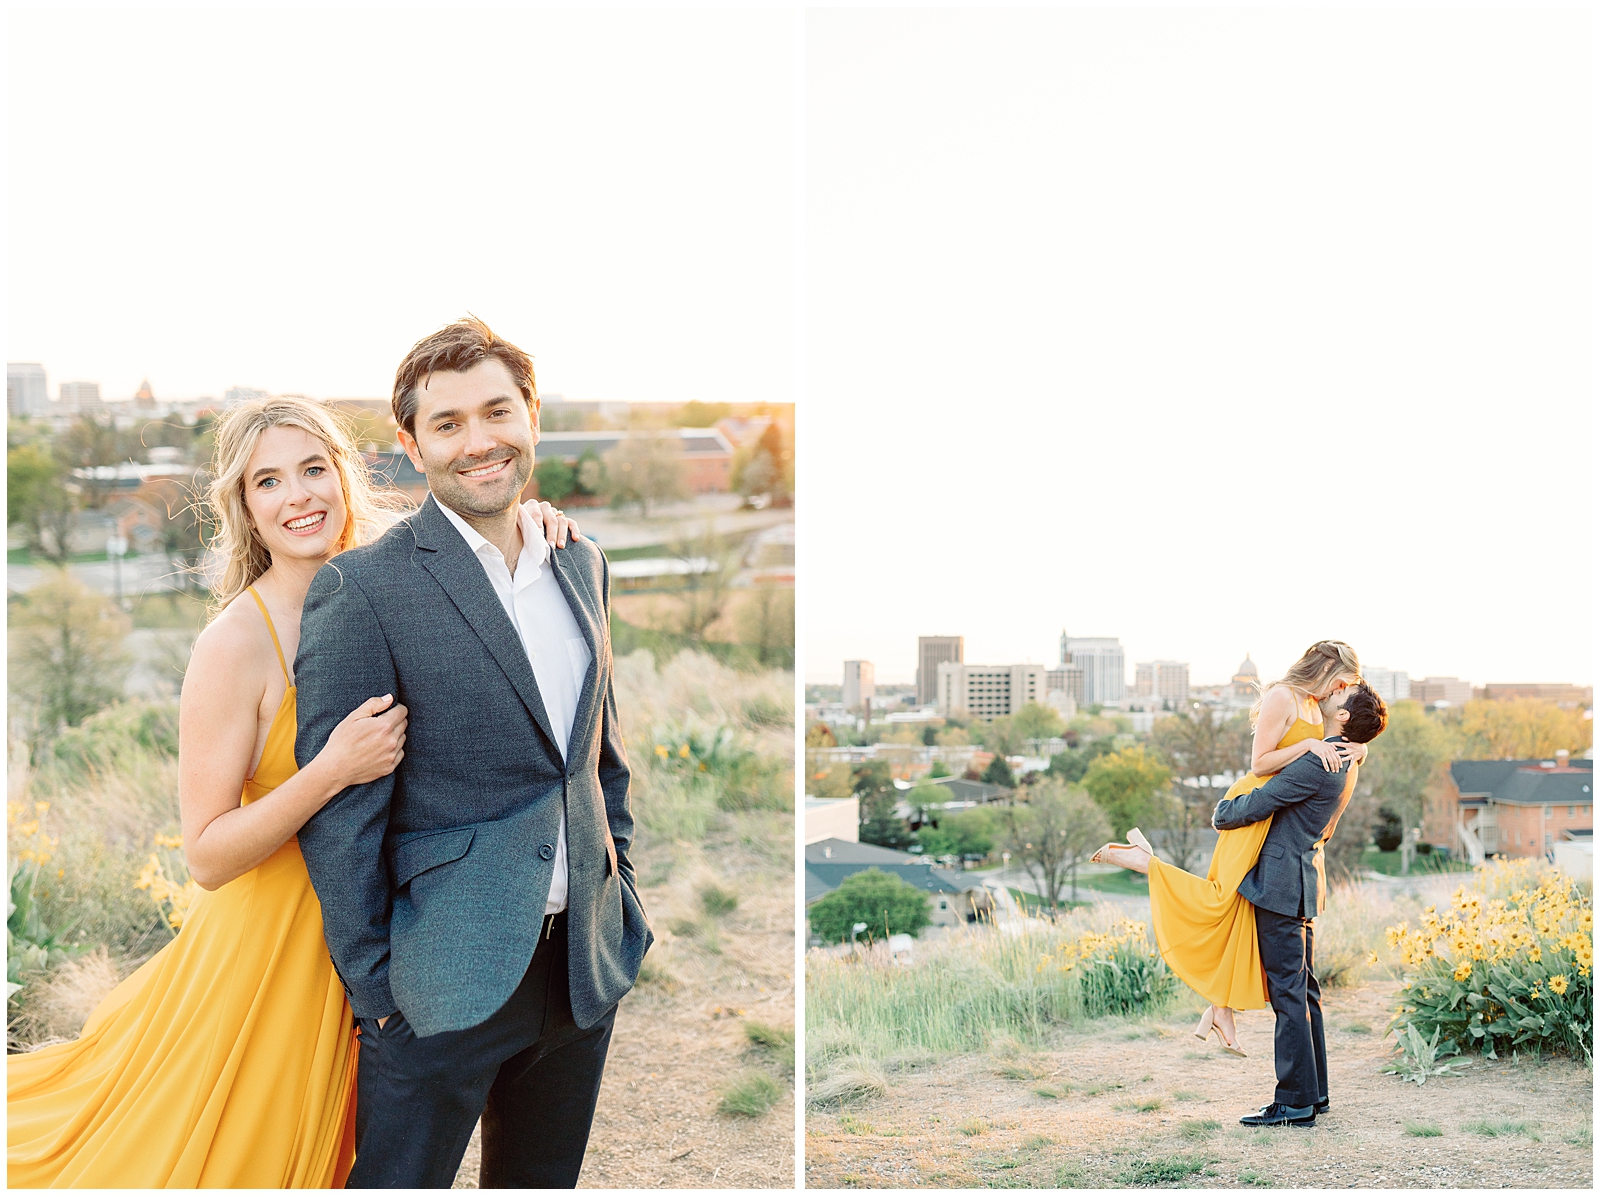 Elegant Boise Foothills Engagement Session in the Wildflowers with Yellow Dress